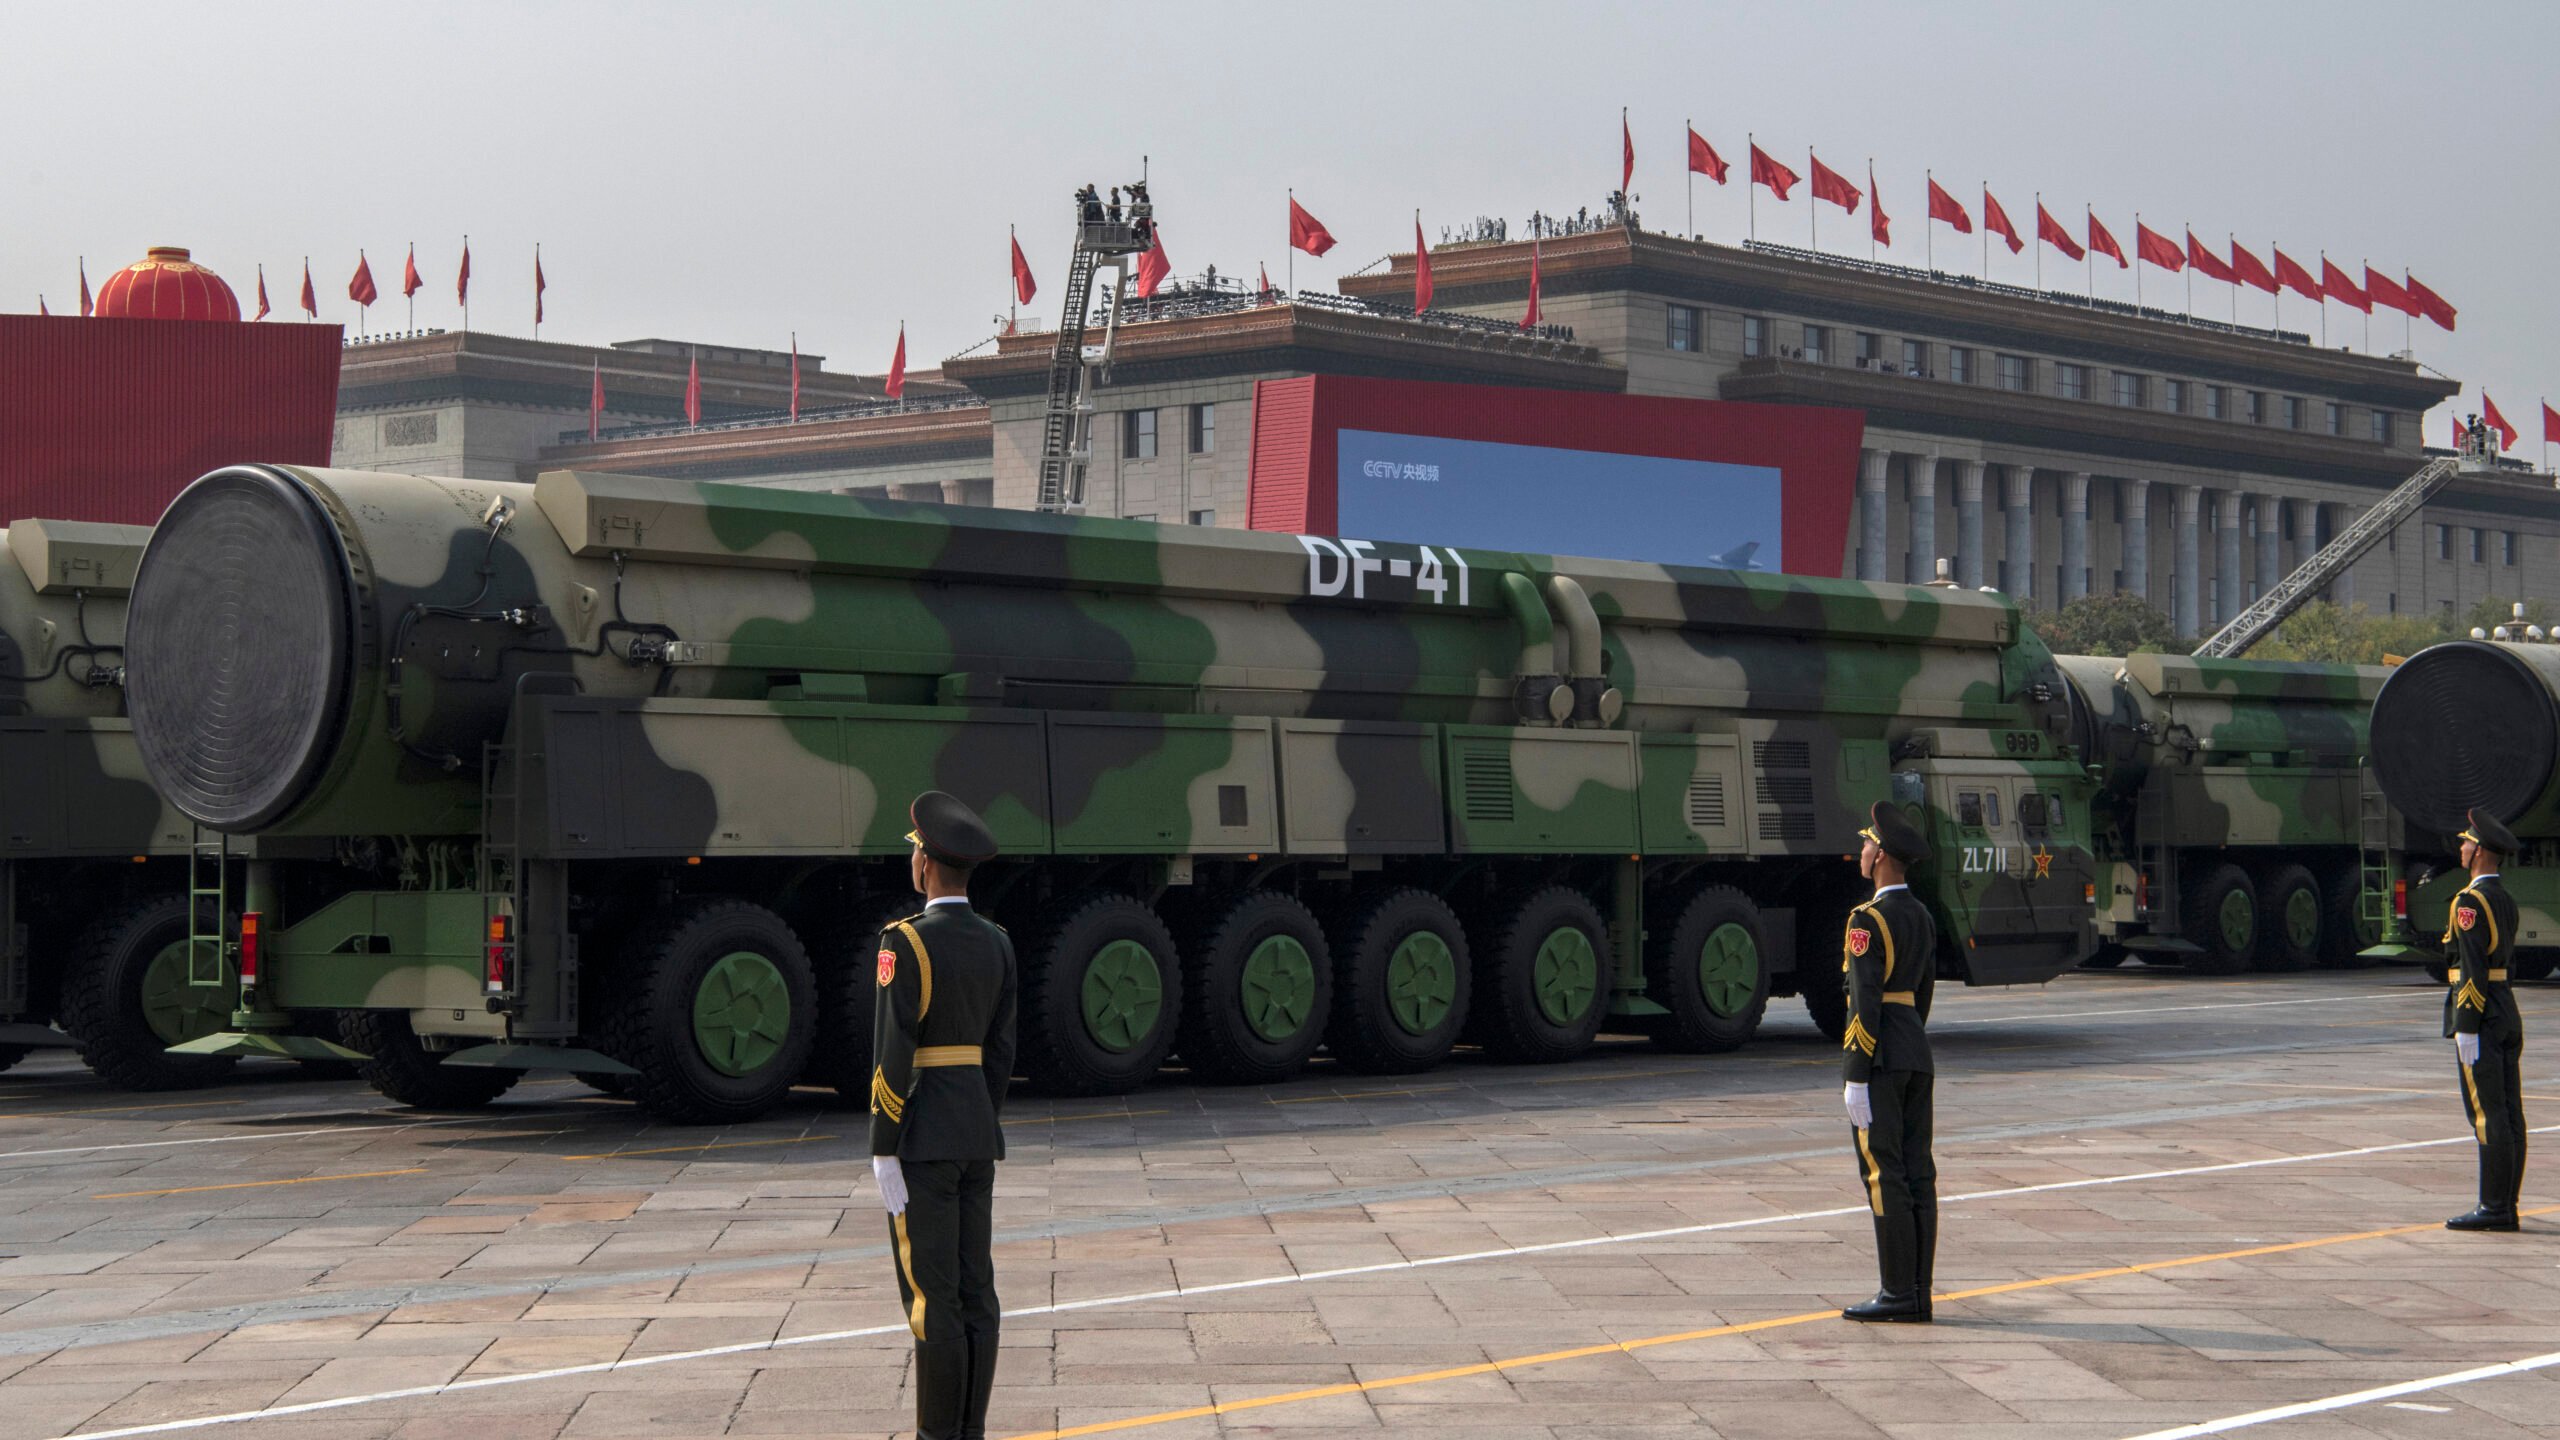 70th Anniversary Of The Founding Of The People’s Republic Of China – Military Parade & Mass Pageantry